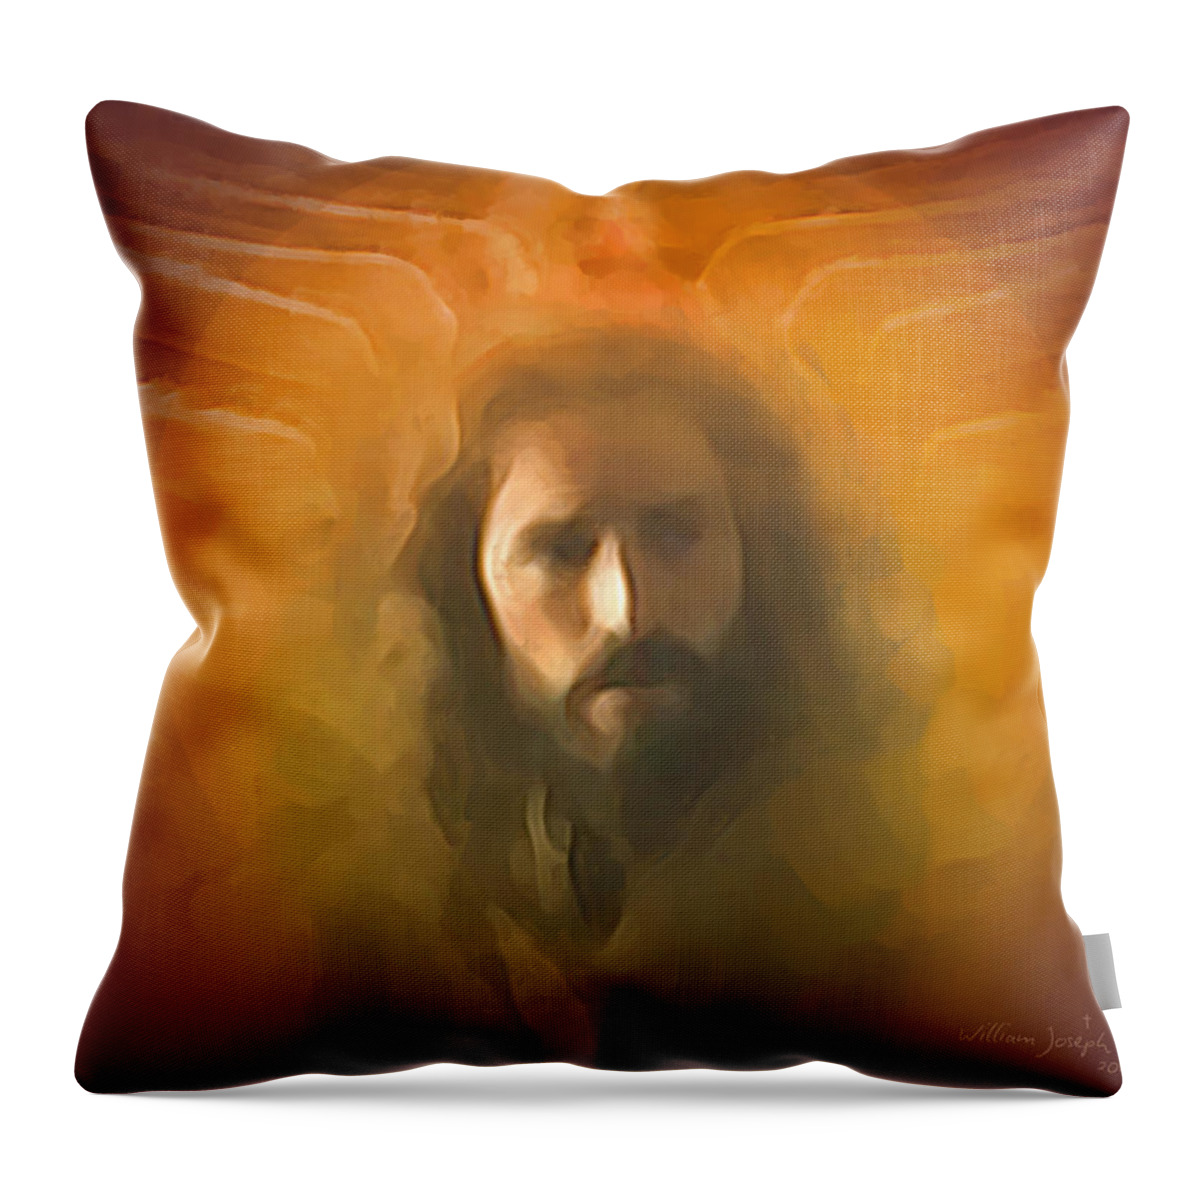 Jesus Throw Pillow featuring the painting The Messiah by Bill McEntee